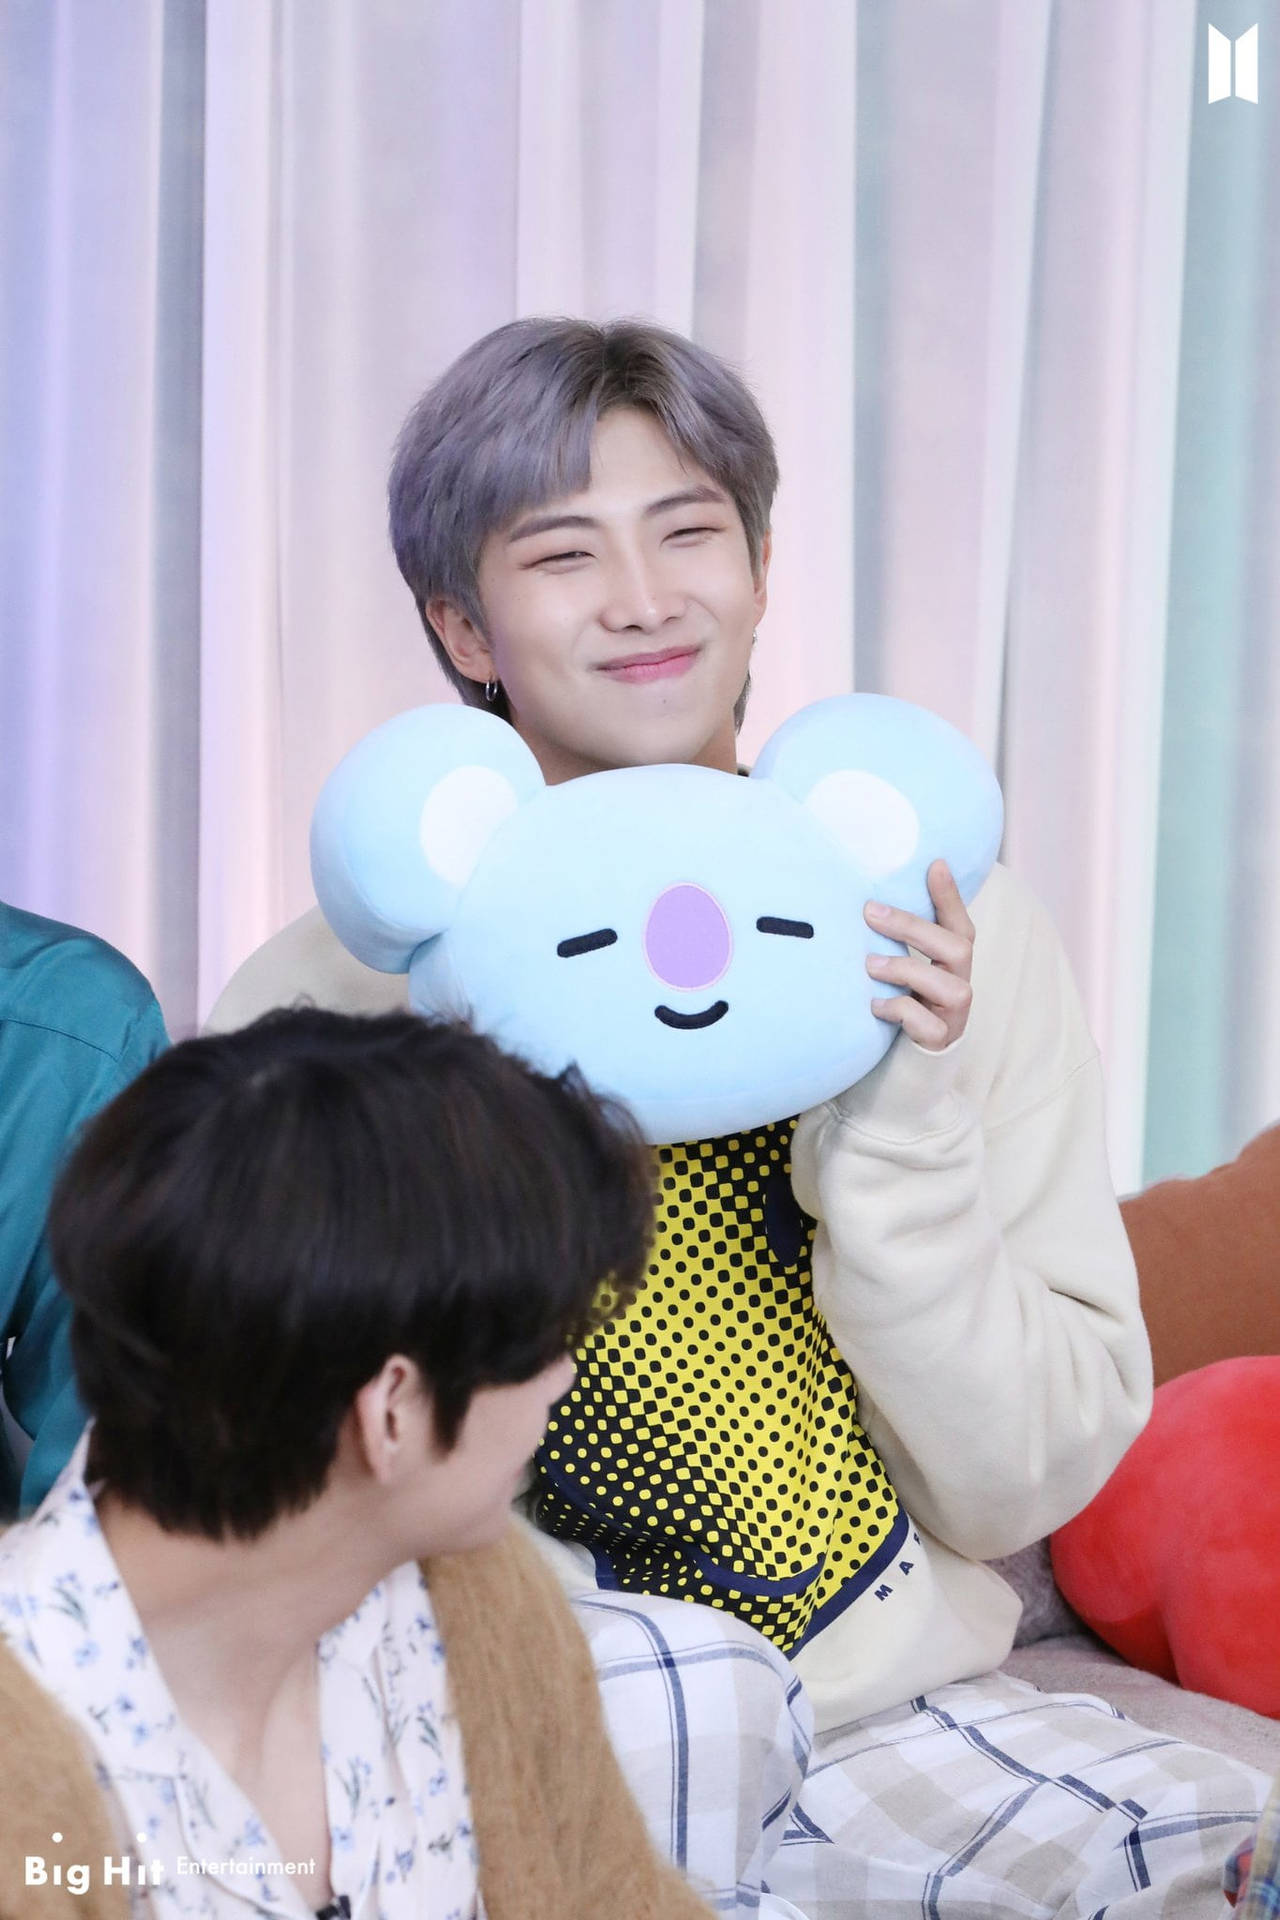 Caption: Adorable Rm Plush Toy Inspired By Bts Band Member